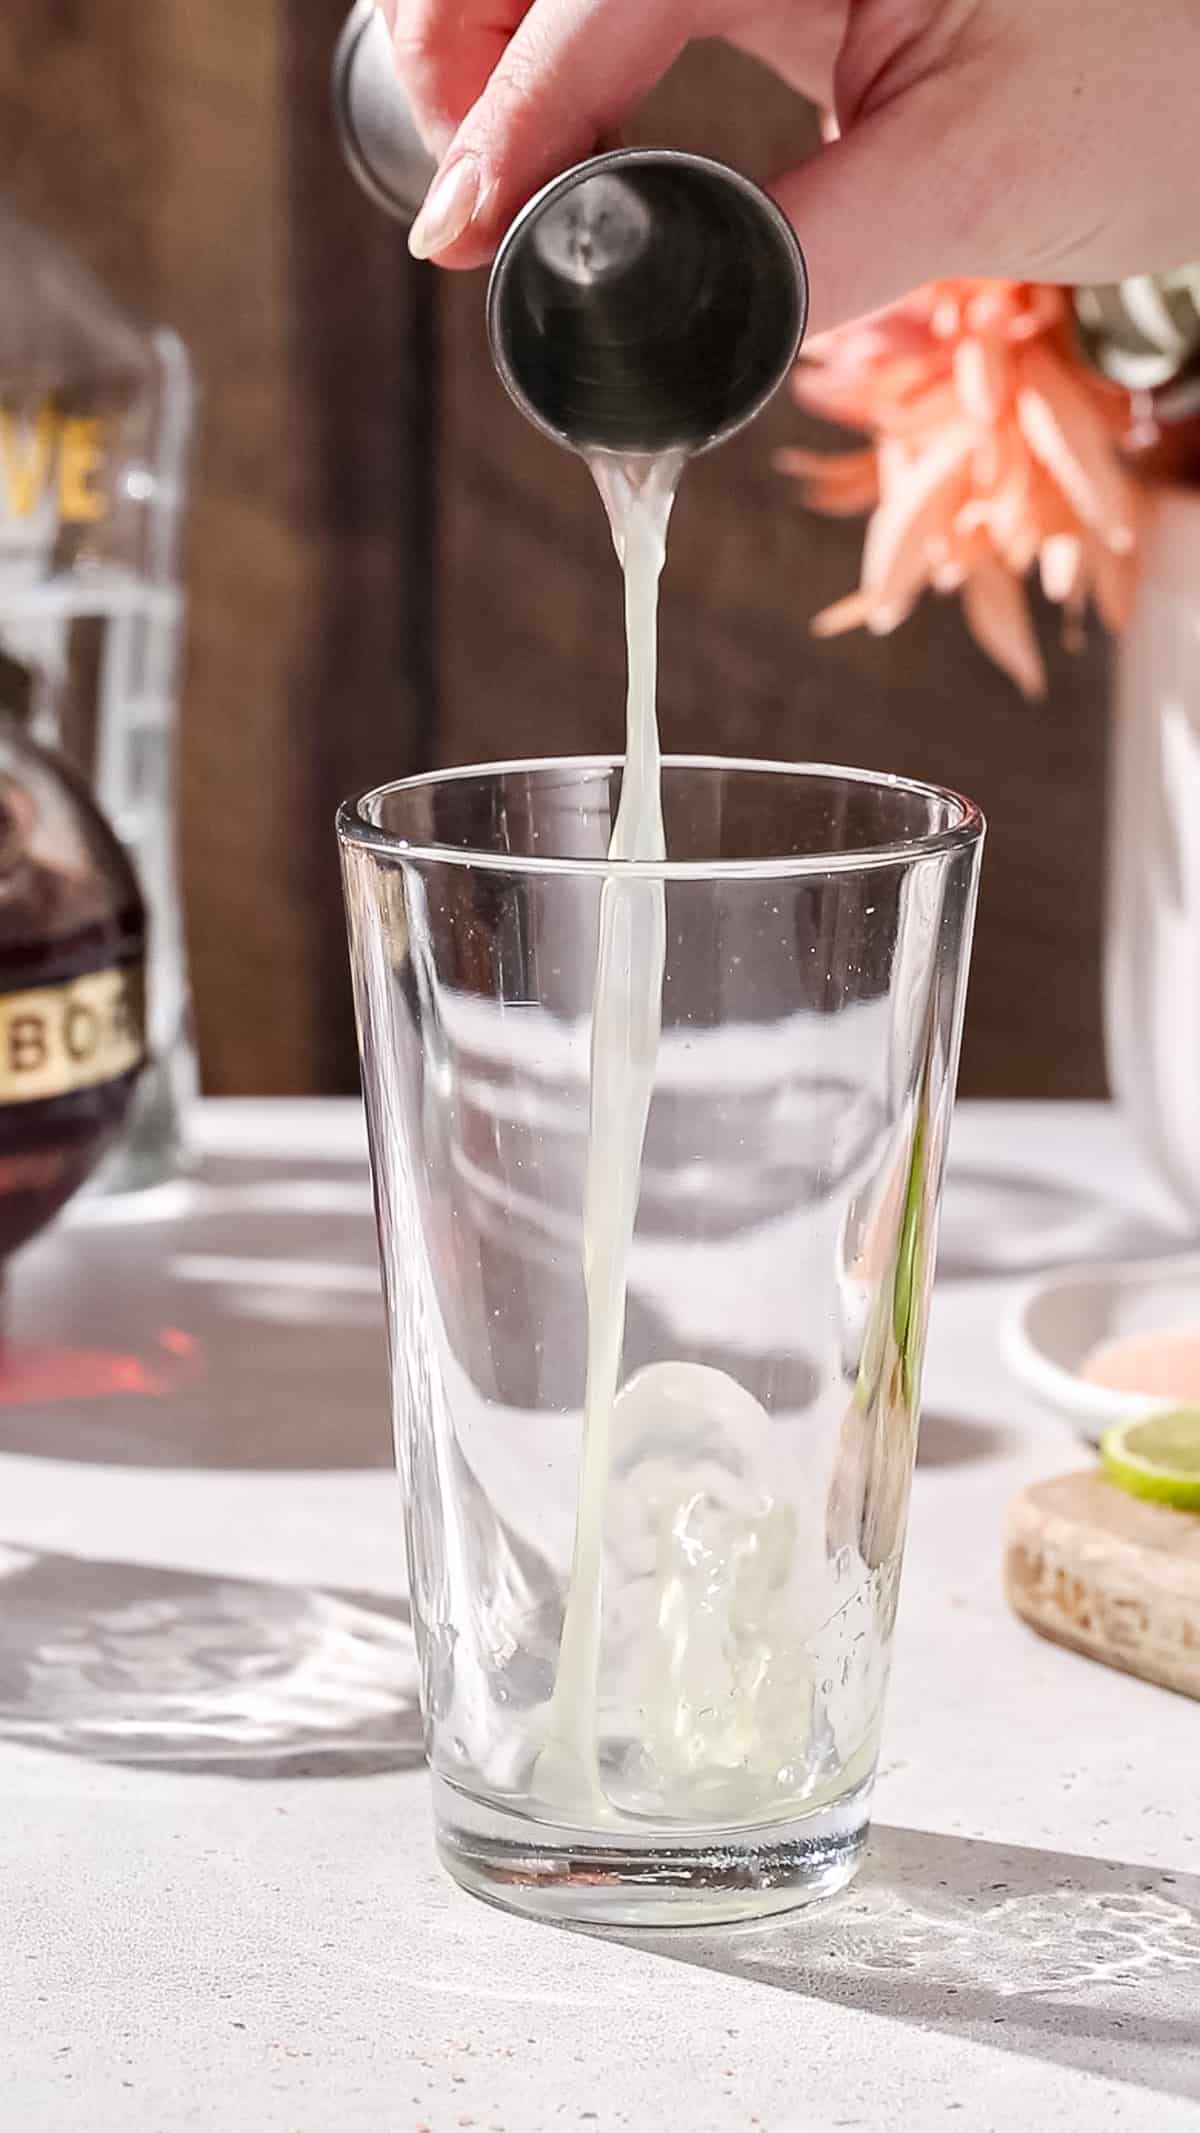 Hand using a jigger to add lime juice into a cocktail shaker.